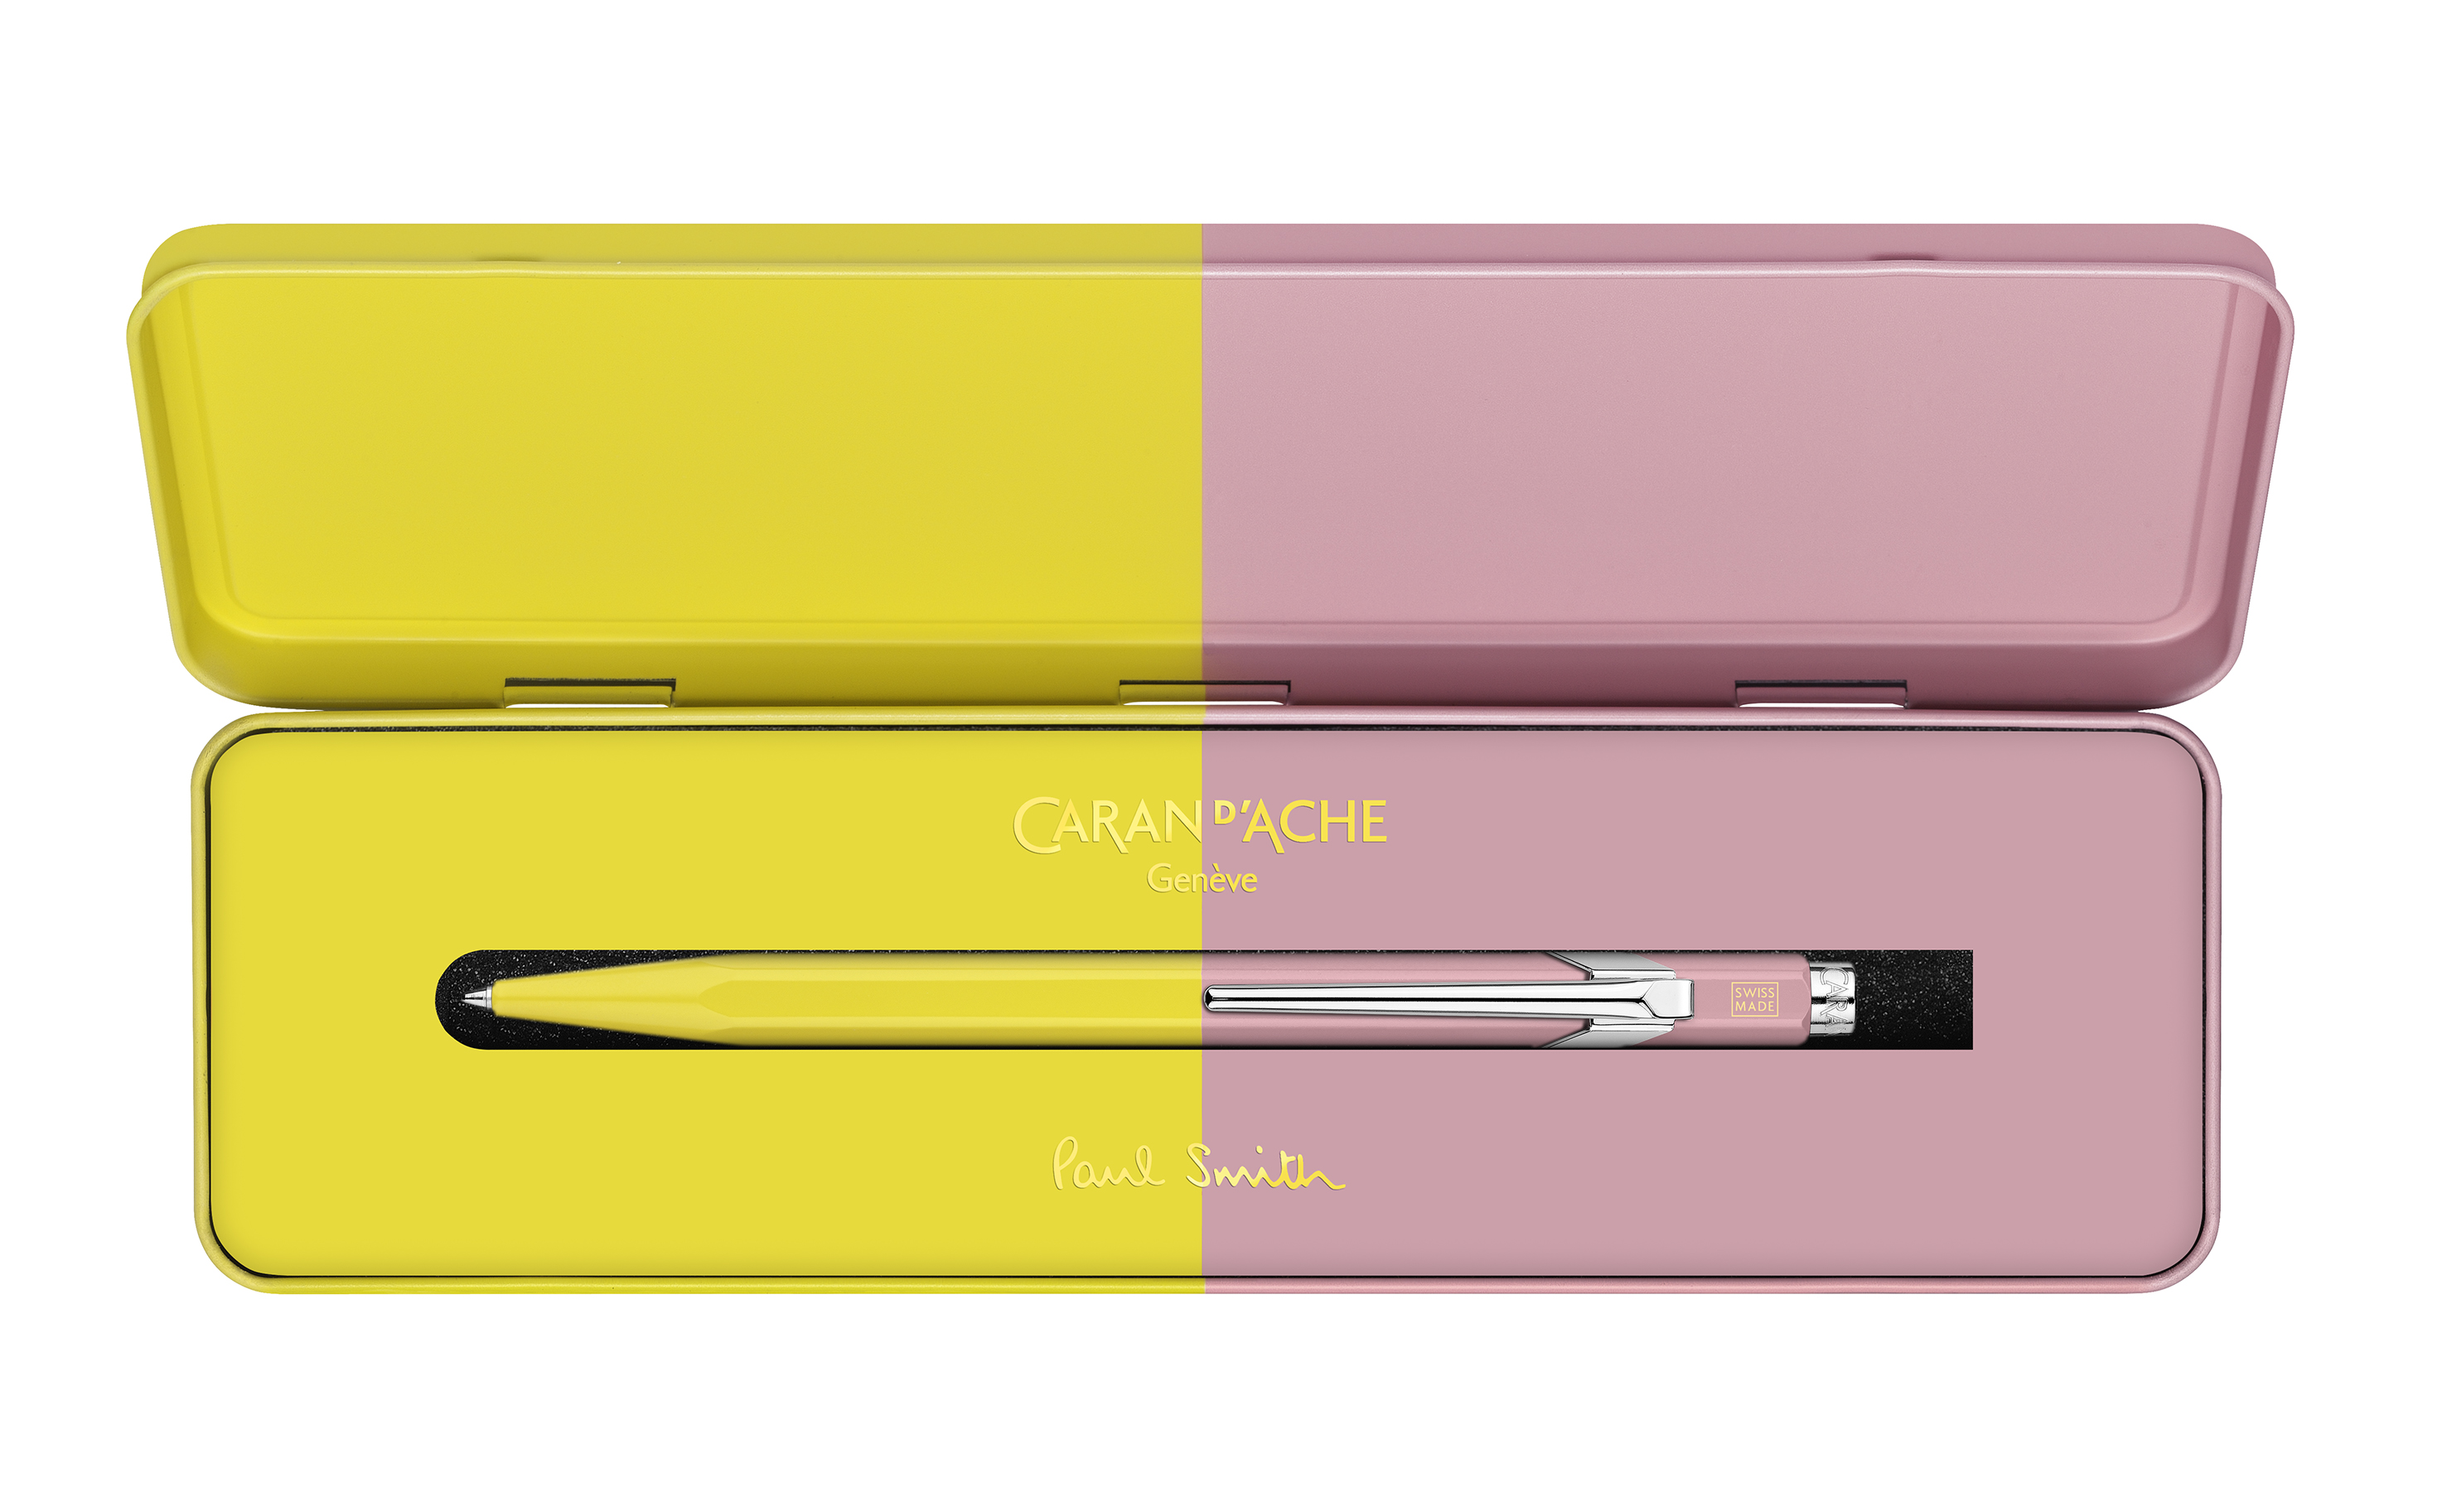 ballpoint pen 849 collaboration paul smith fourth edition colours chartreuse and rose in its metal case